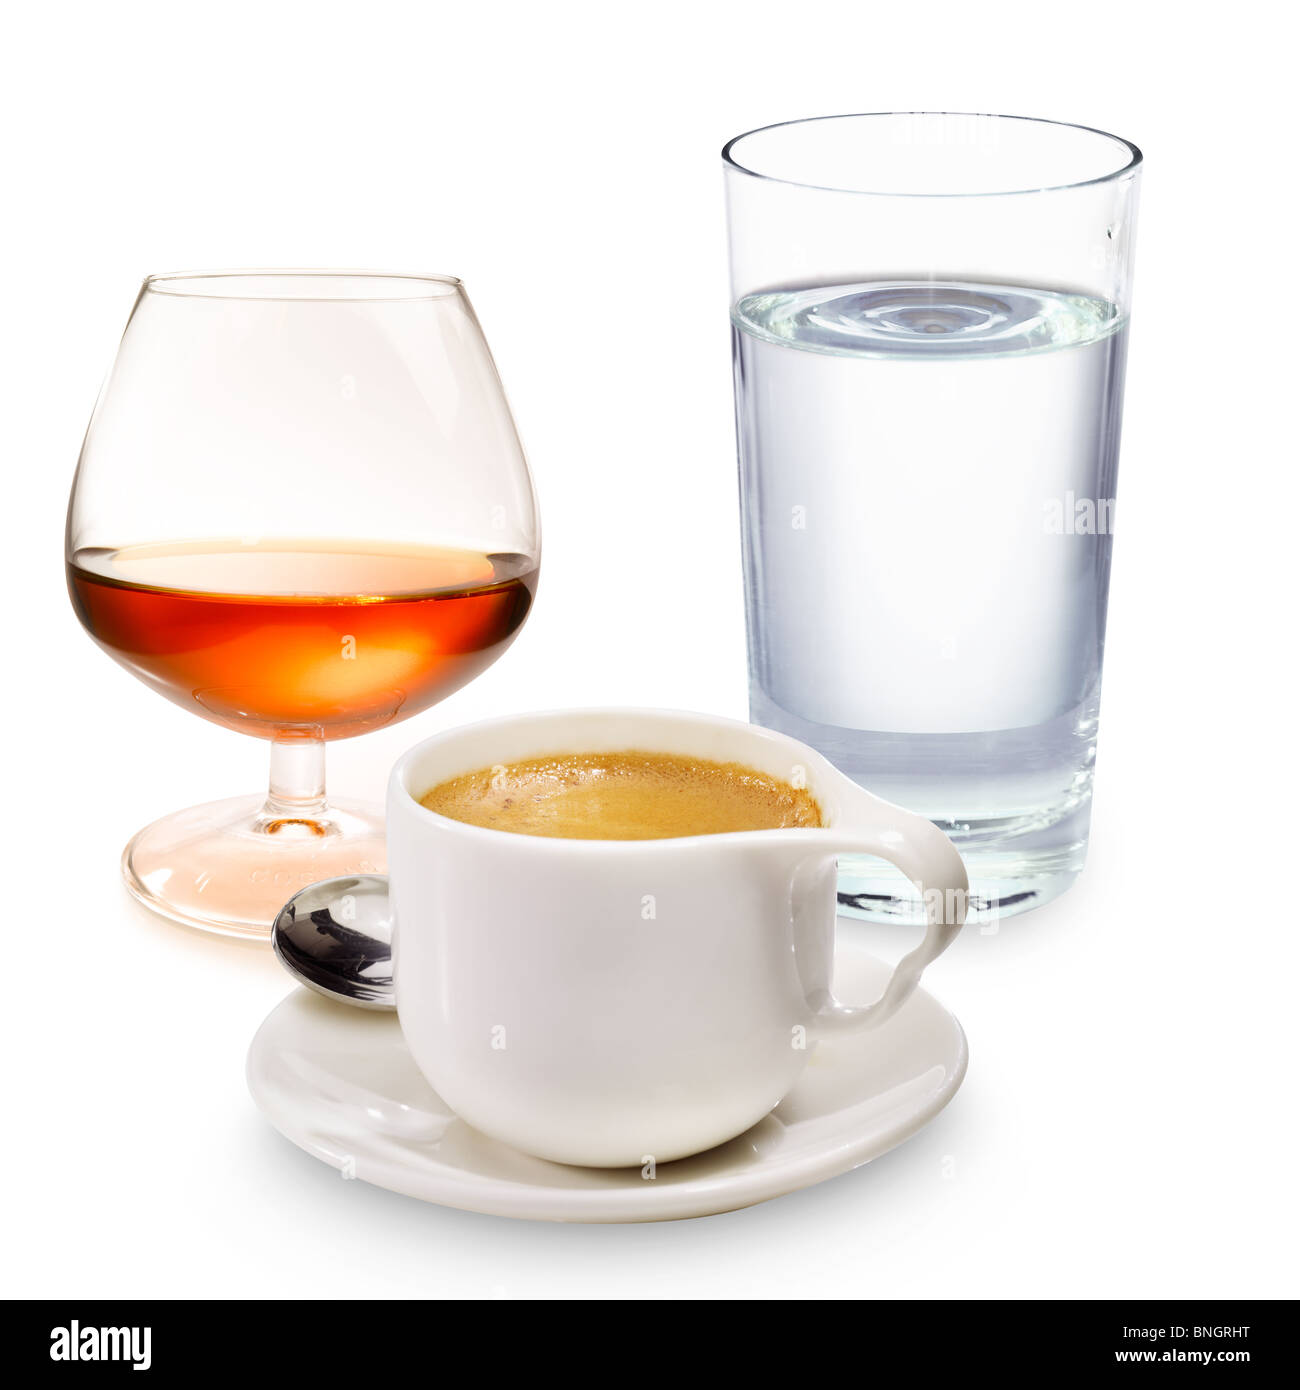 Espresso with a glass of liqueur and a glass of water Stock Photo